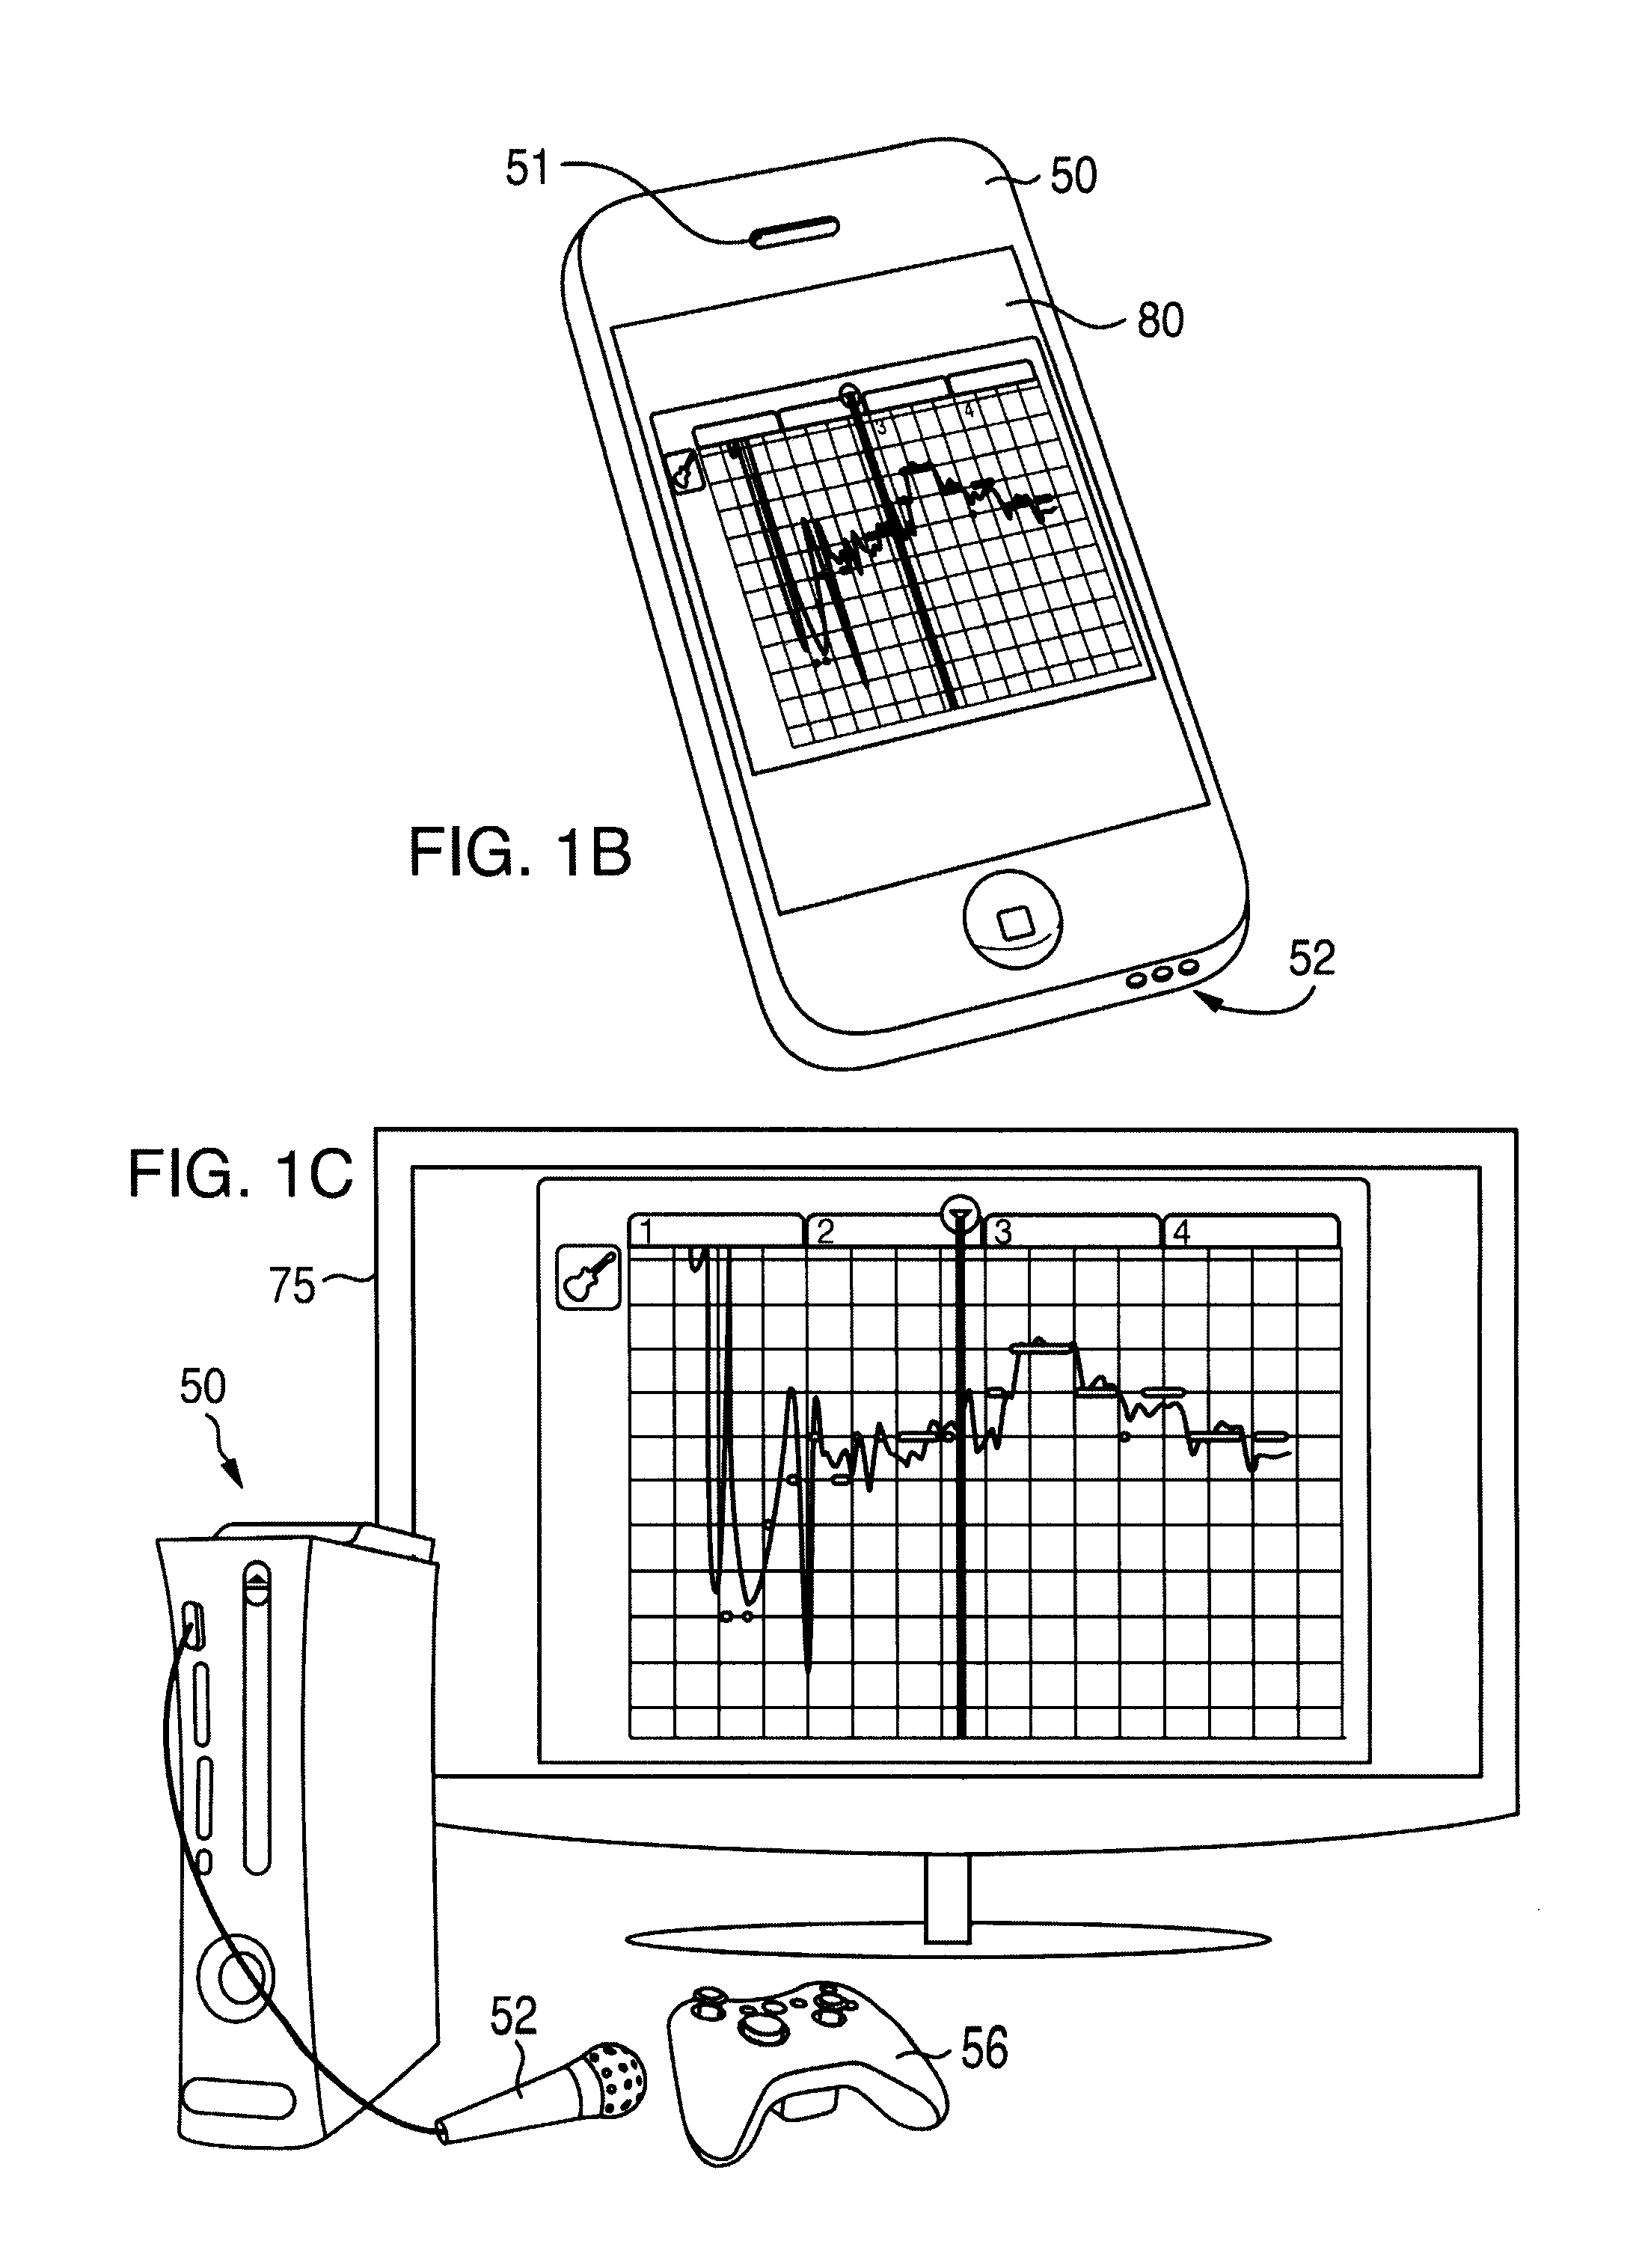 System and Method for Producing a Harmonious Musical Accompaniment